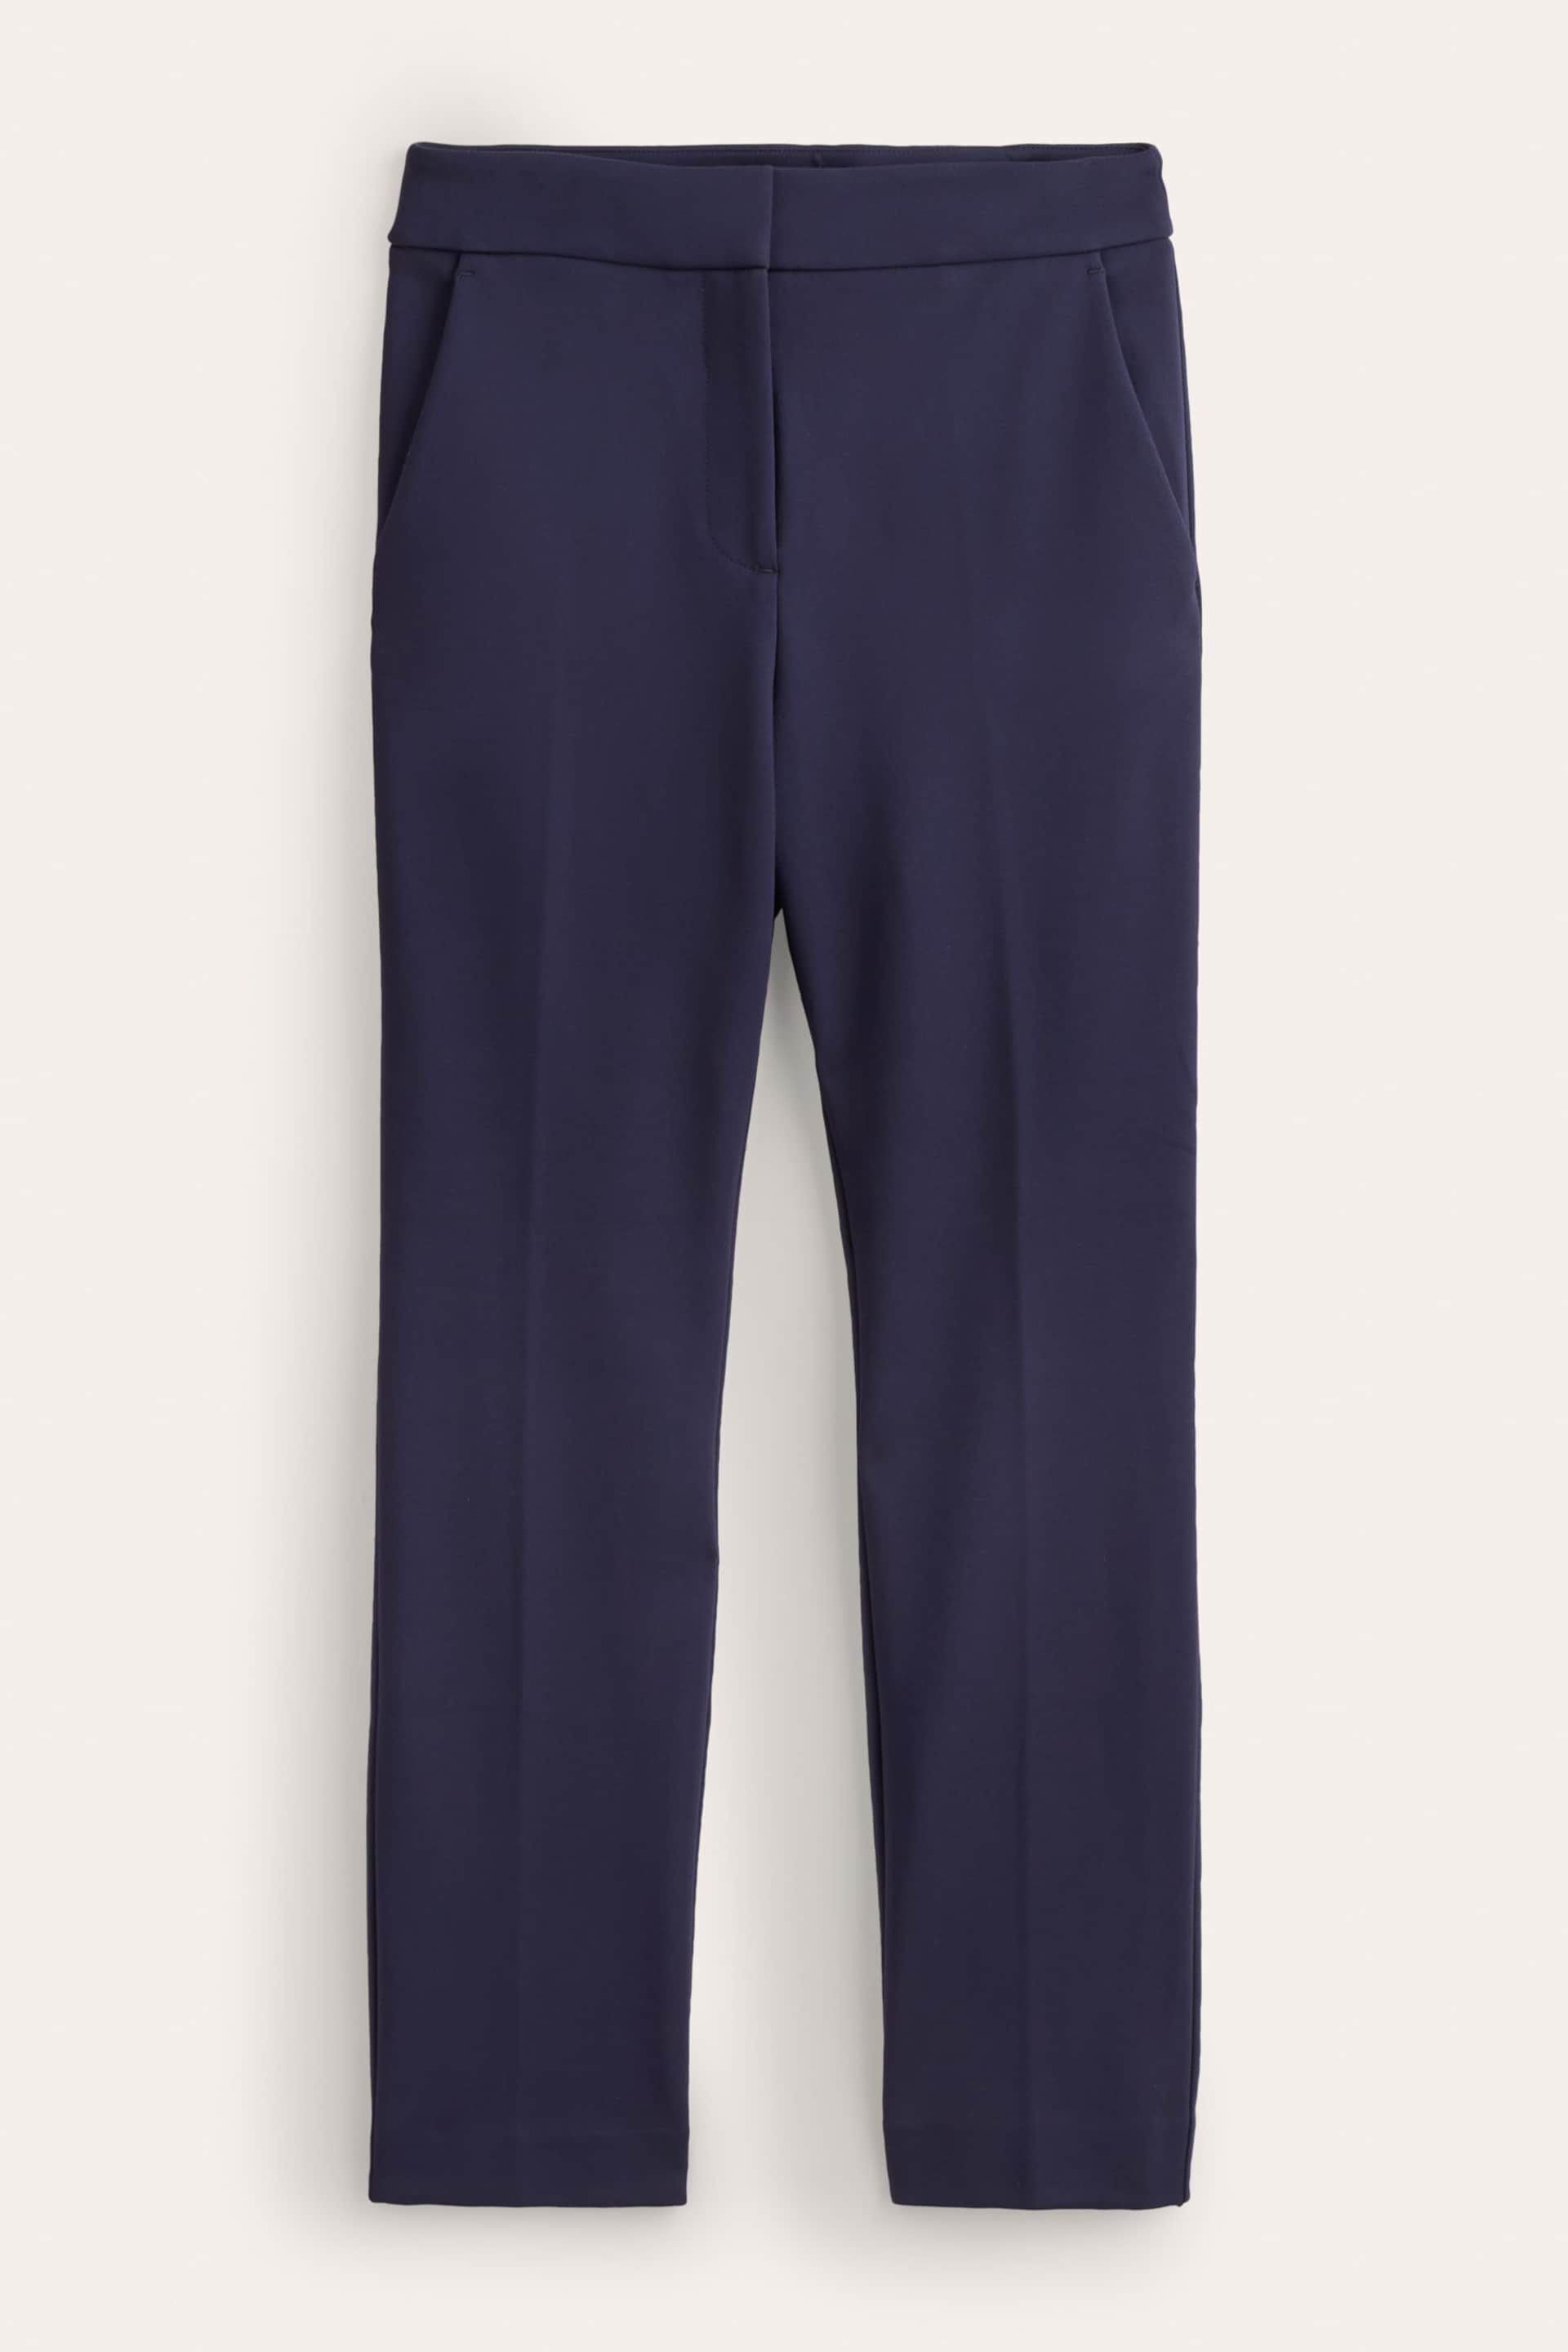 Boden Navy Blue Hampshire 7/8 Trousers - Image 6 of 6